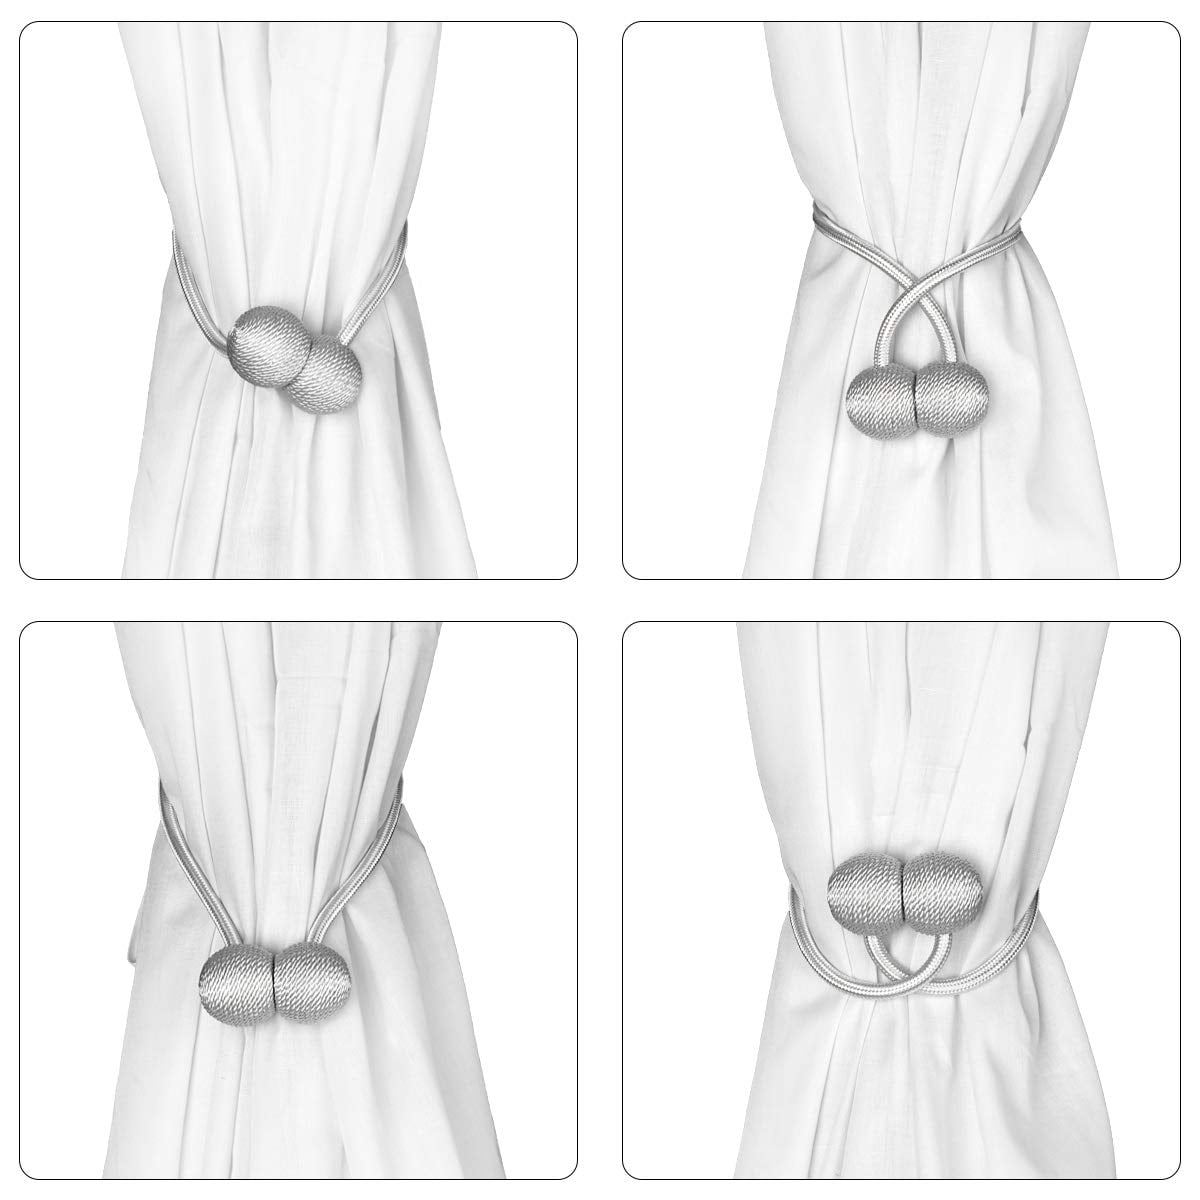 Silver Crystal IAGORYUE Curtain Tie backs 2 Pcs Metal TieBacks with Classy Small Pearl Elastic Rope Curtains Hold Holdbacks for Home Office Hotel Window Drape Deco No-Install/Drill/Hooks/Magnetic 